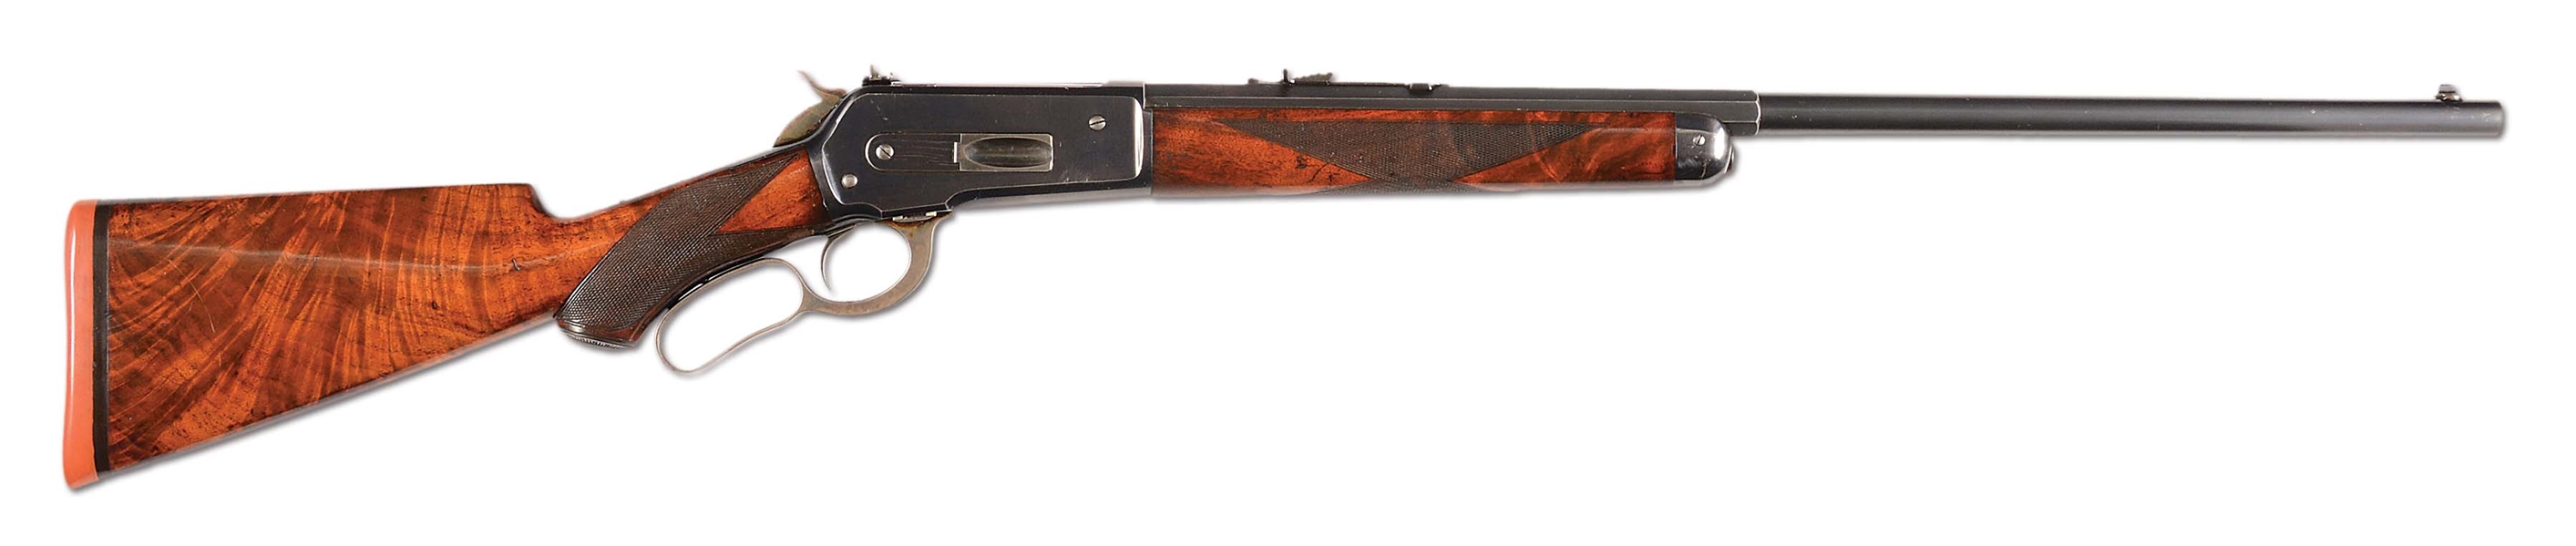 (C) HIGH CONDITION WINCHESTER MODEL 1886 .50-100-450 DELUXE RIFLE 